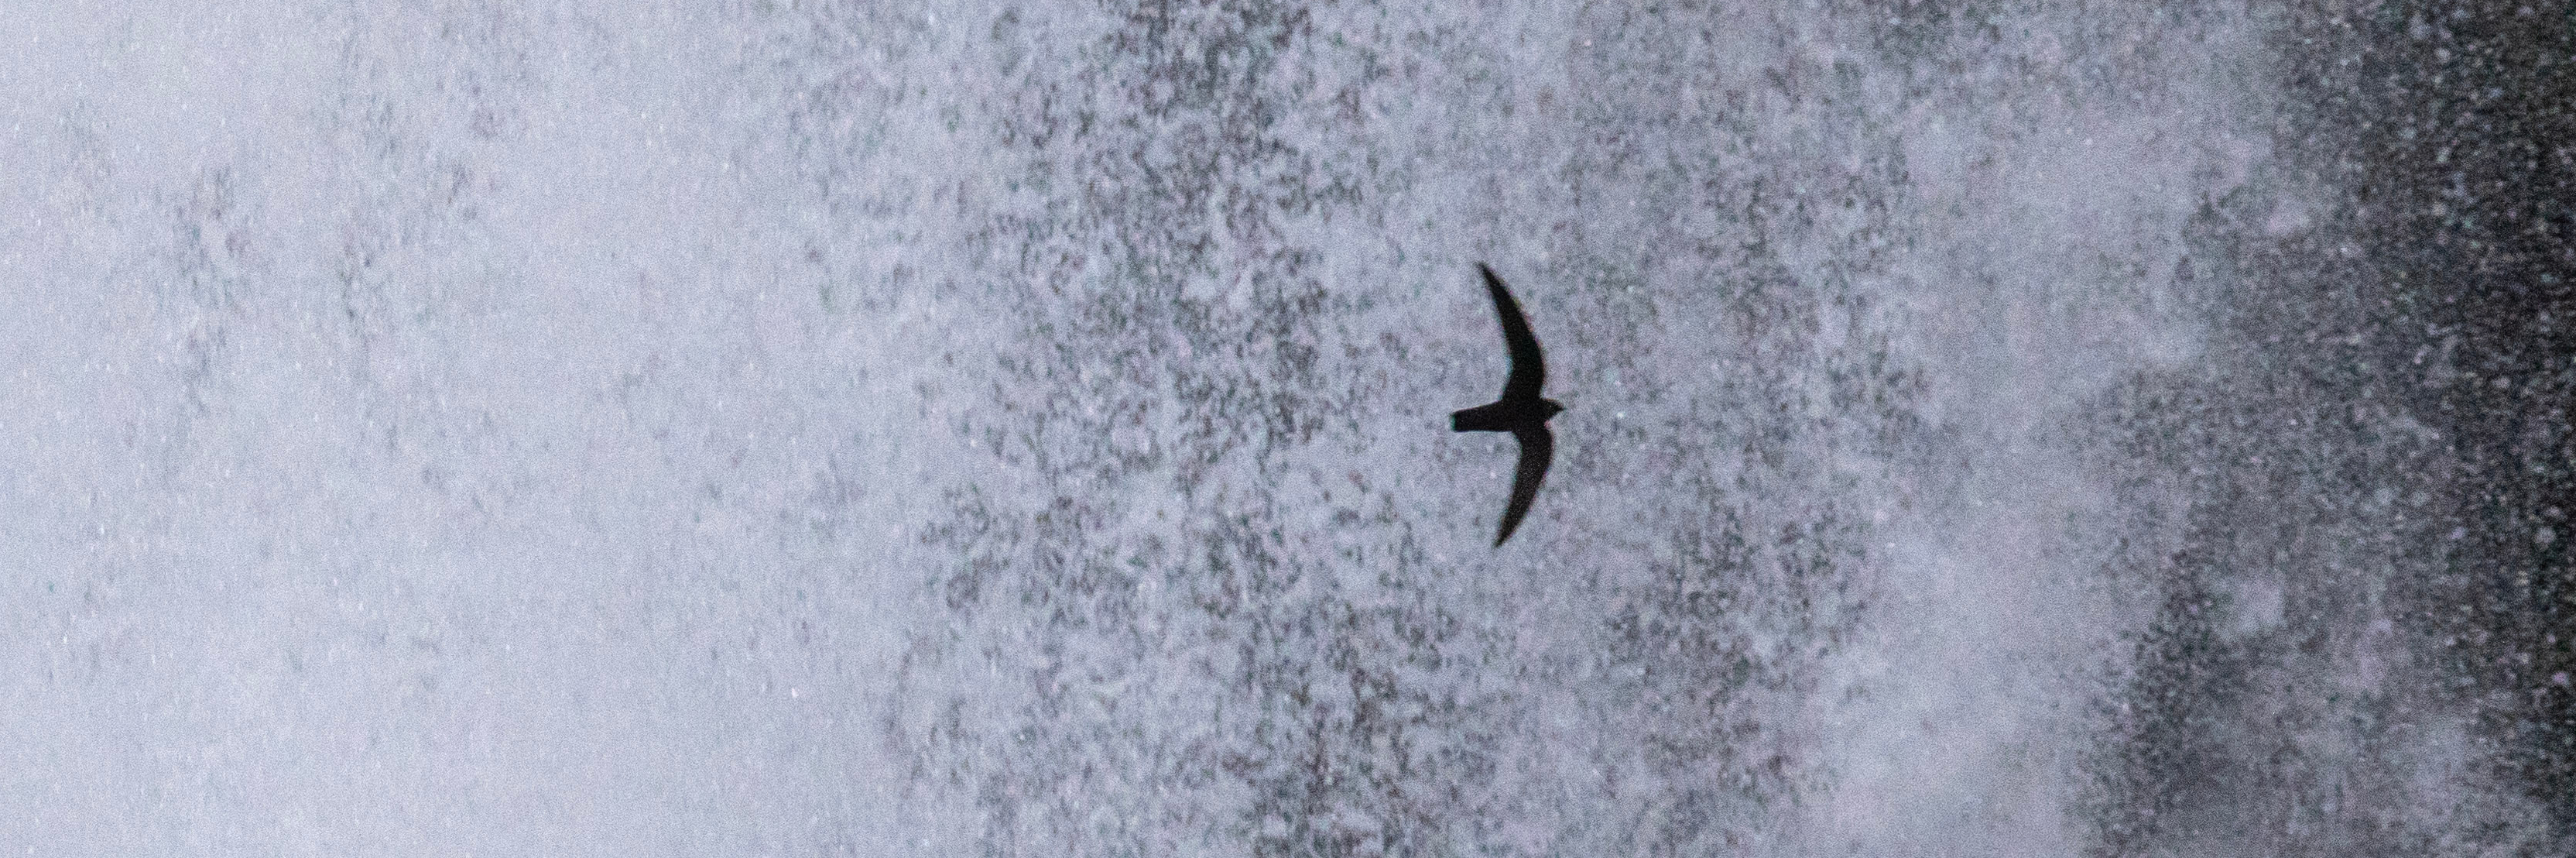 The silhouette of a black swift stands out against a waterfall. 